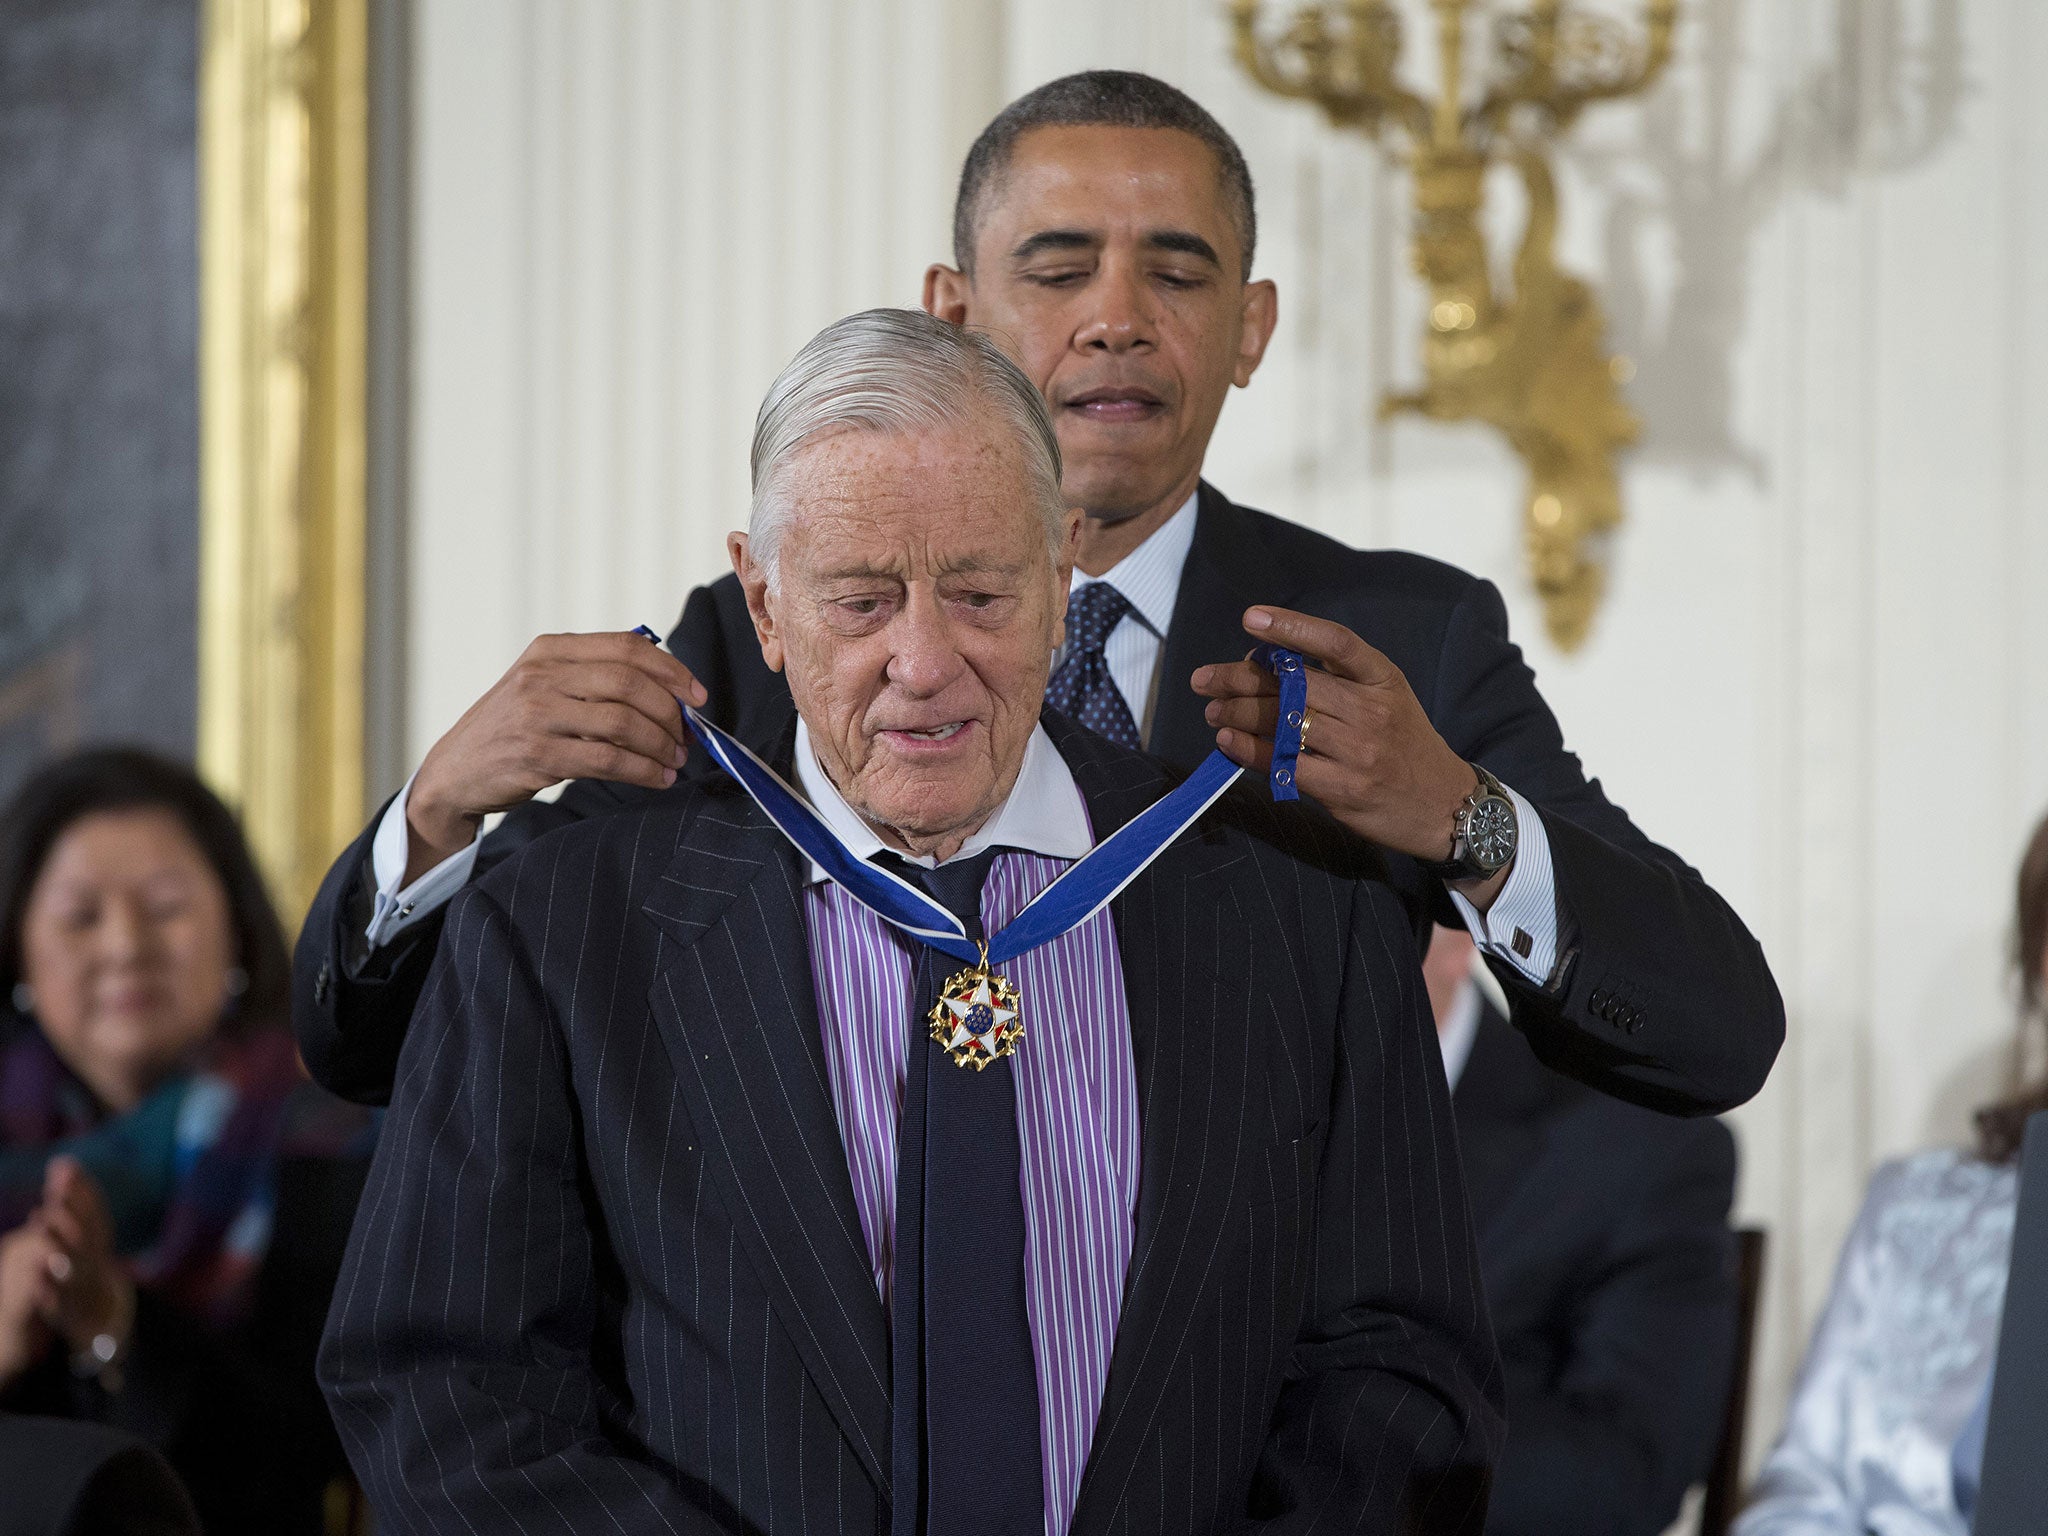 President Barack Obama awards former Washington Post executive editor Ben Bradlee with the Presidential Medal of Freedom at the White House in November 2013